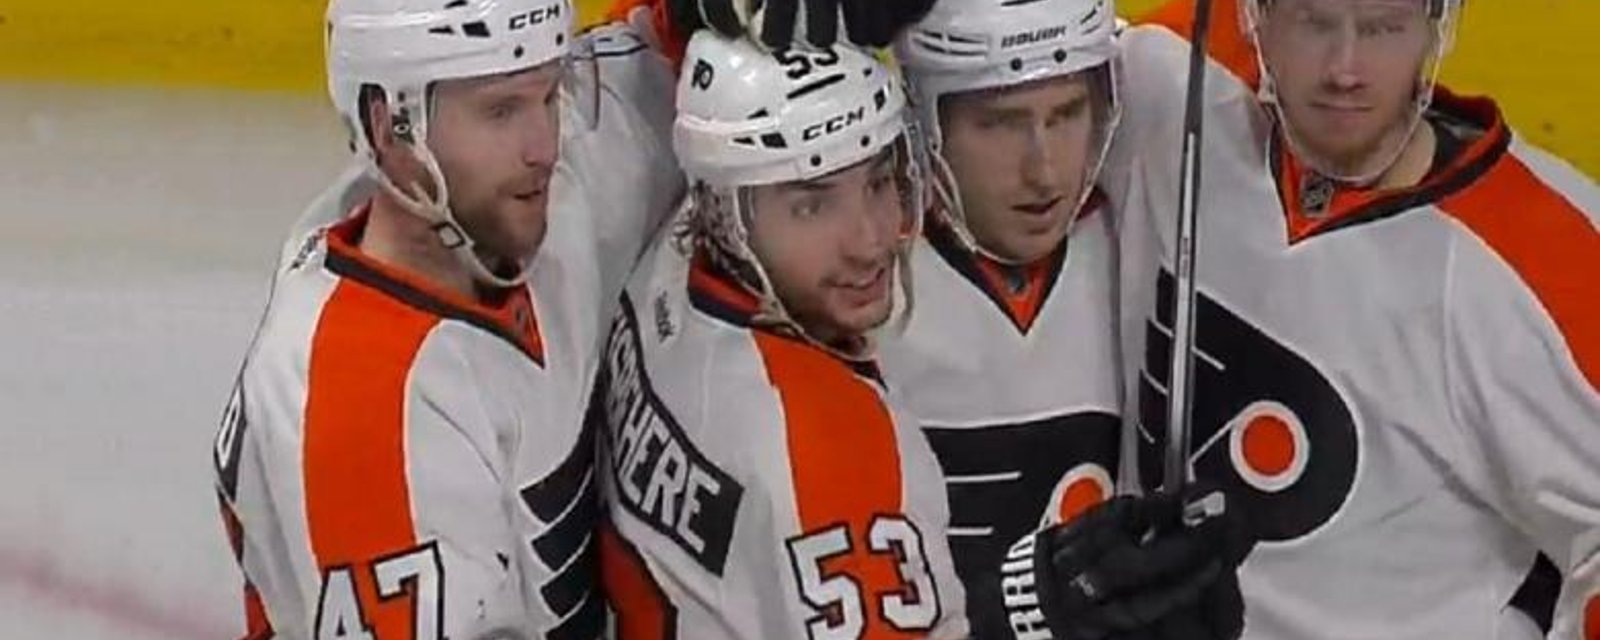 Gostisbehere extends his record point streak with beautiful assist!